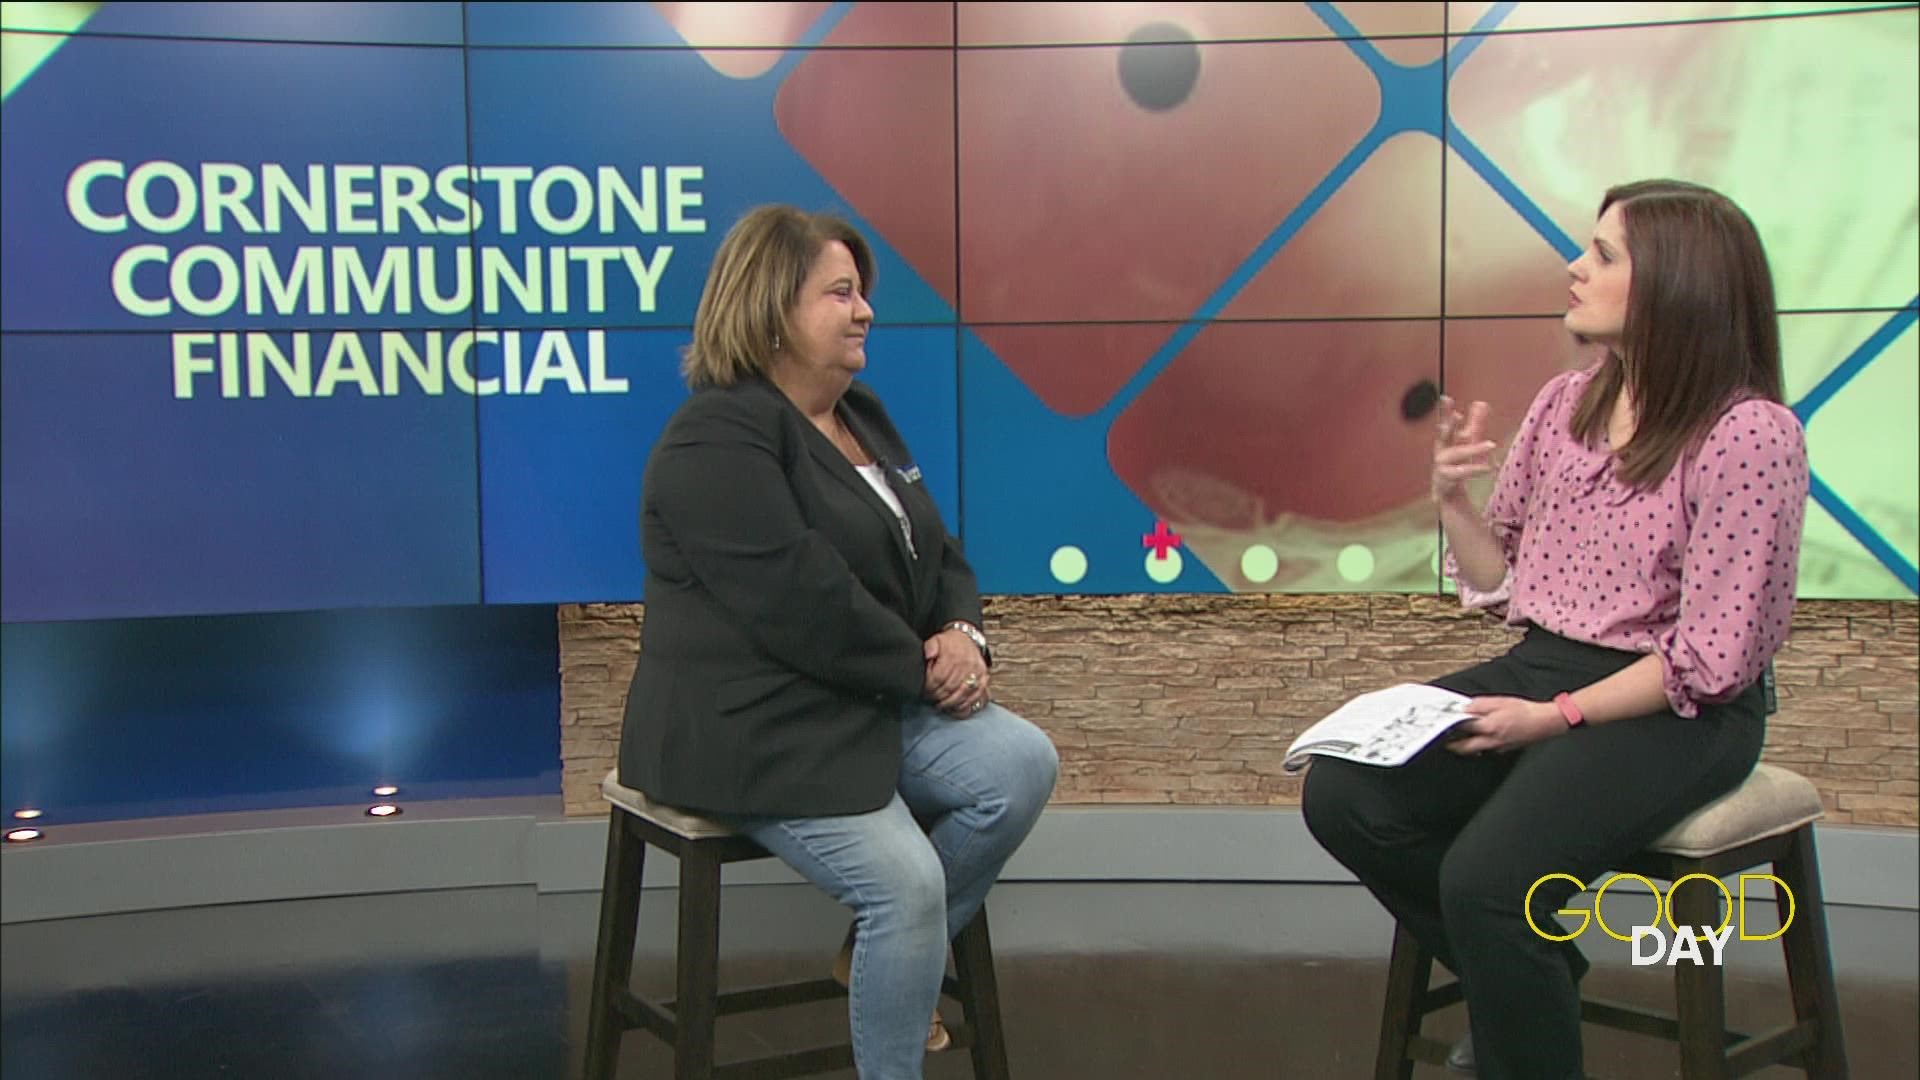 Cornerstone Community Financial talks how to avoid some common scams that attempt to take advantage of consumers.